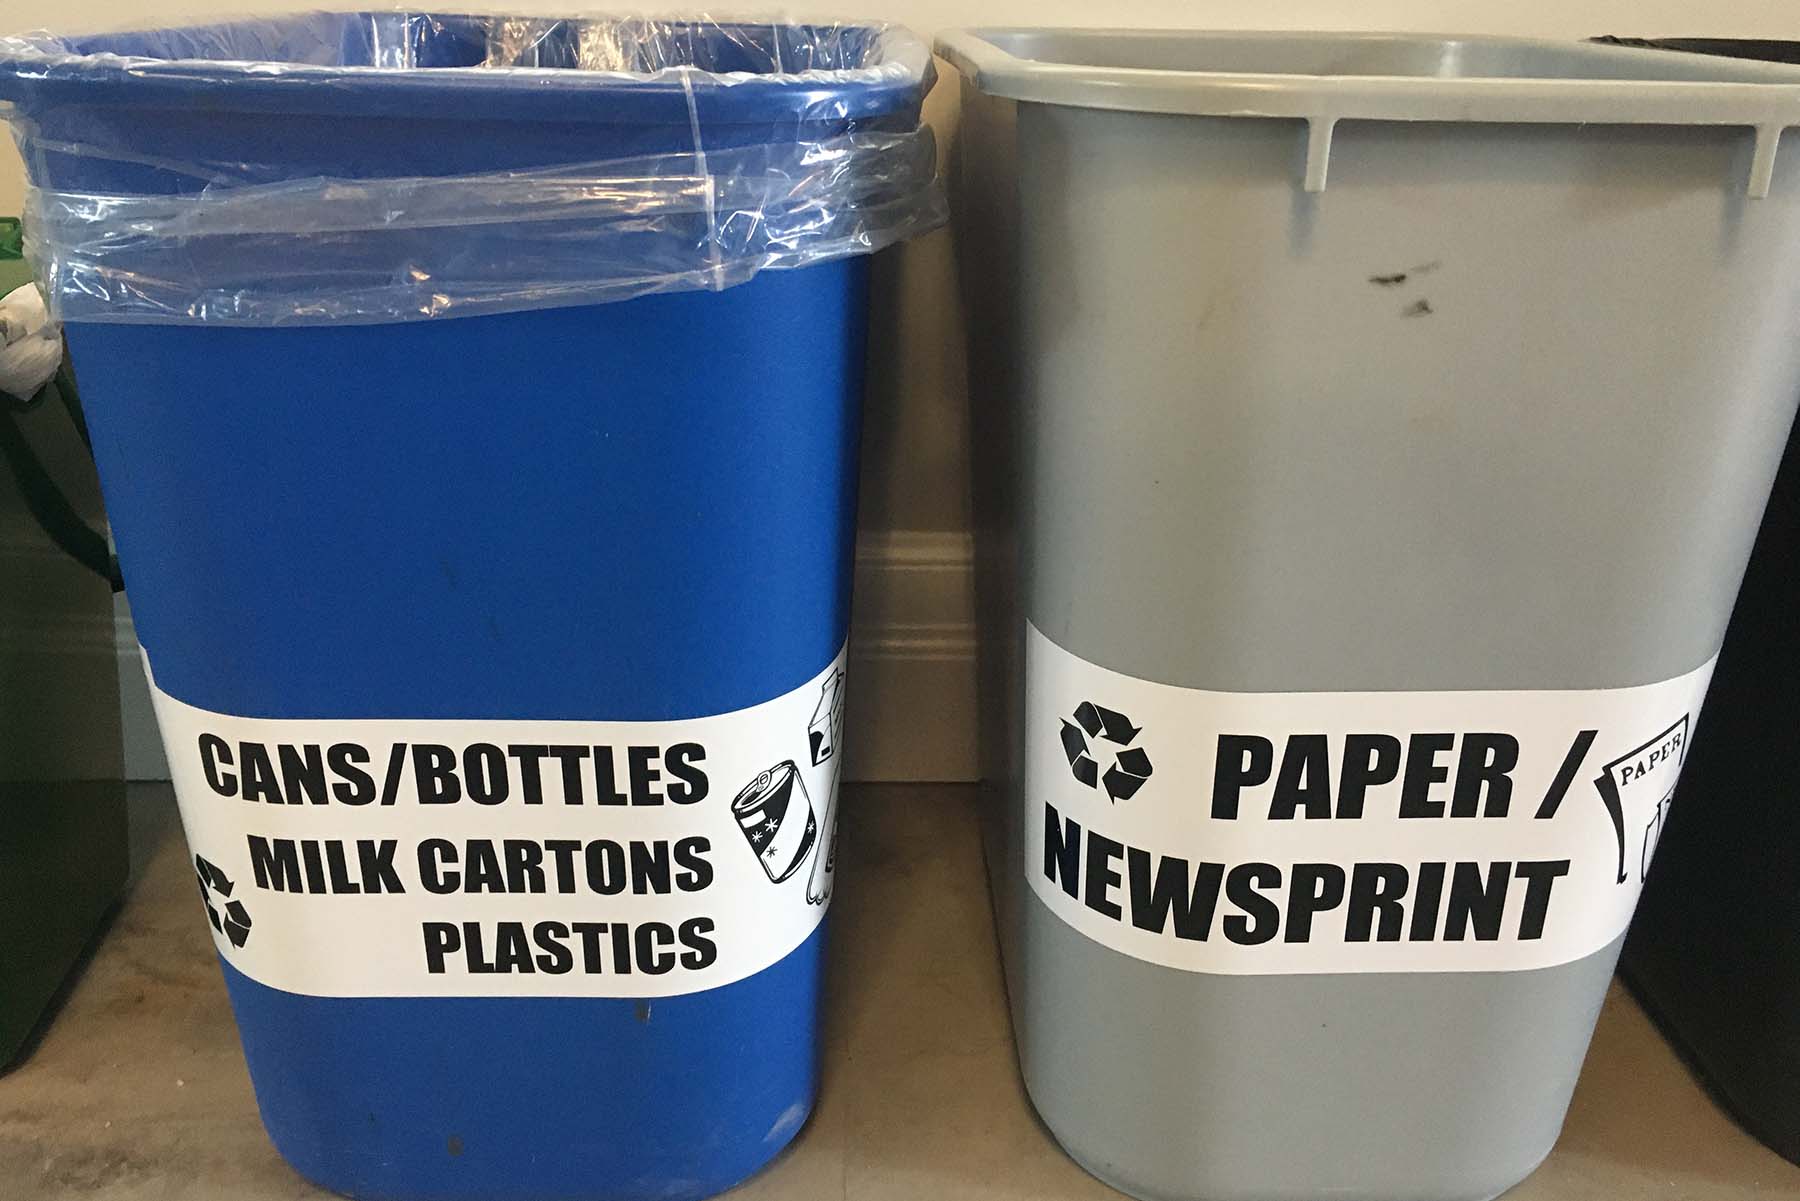 https://brocku.ca/sustainability/wp-content/uploads/sites/64/Resized-Recycling-bins.jpg